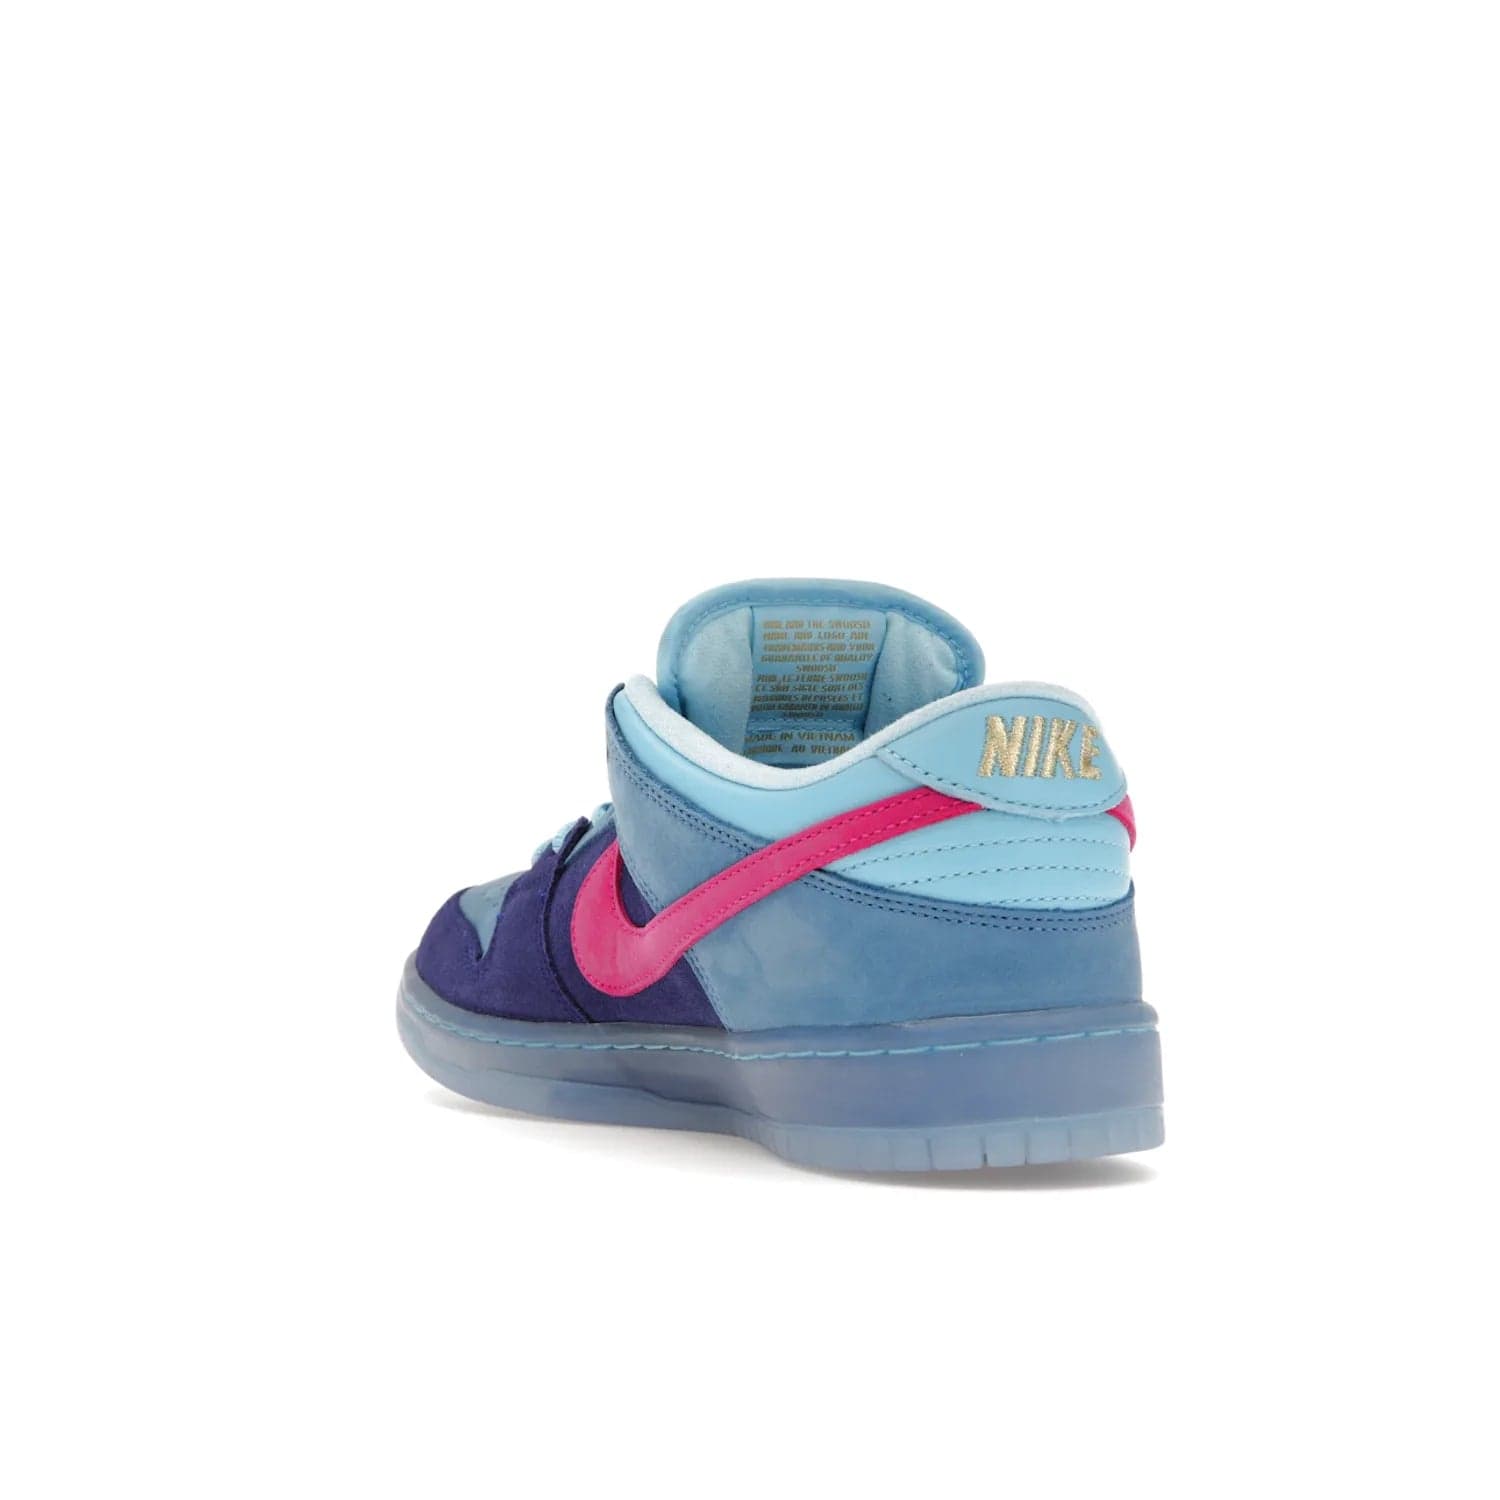 Nike SB Dunk Low Run The Jewels - Image 25 - Only at www.BallersClubKickz.com - The Nike SB Dunk Low Run The Jewels pays tribute to the Run the Jewels 3 album cover. It features a blue suede upper with pink suede accents, gold branding and 3 lace sets. RTJ insoles complete this limited edition sneaker. Get it now for your shoe collection.